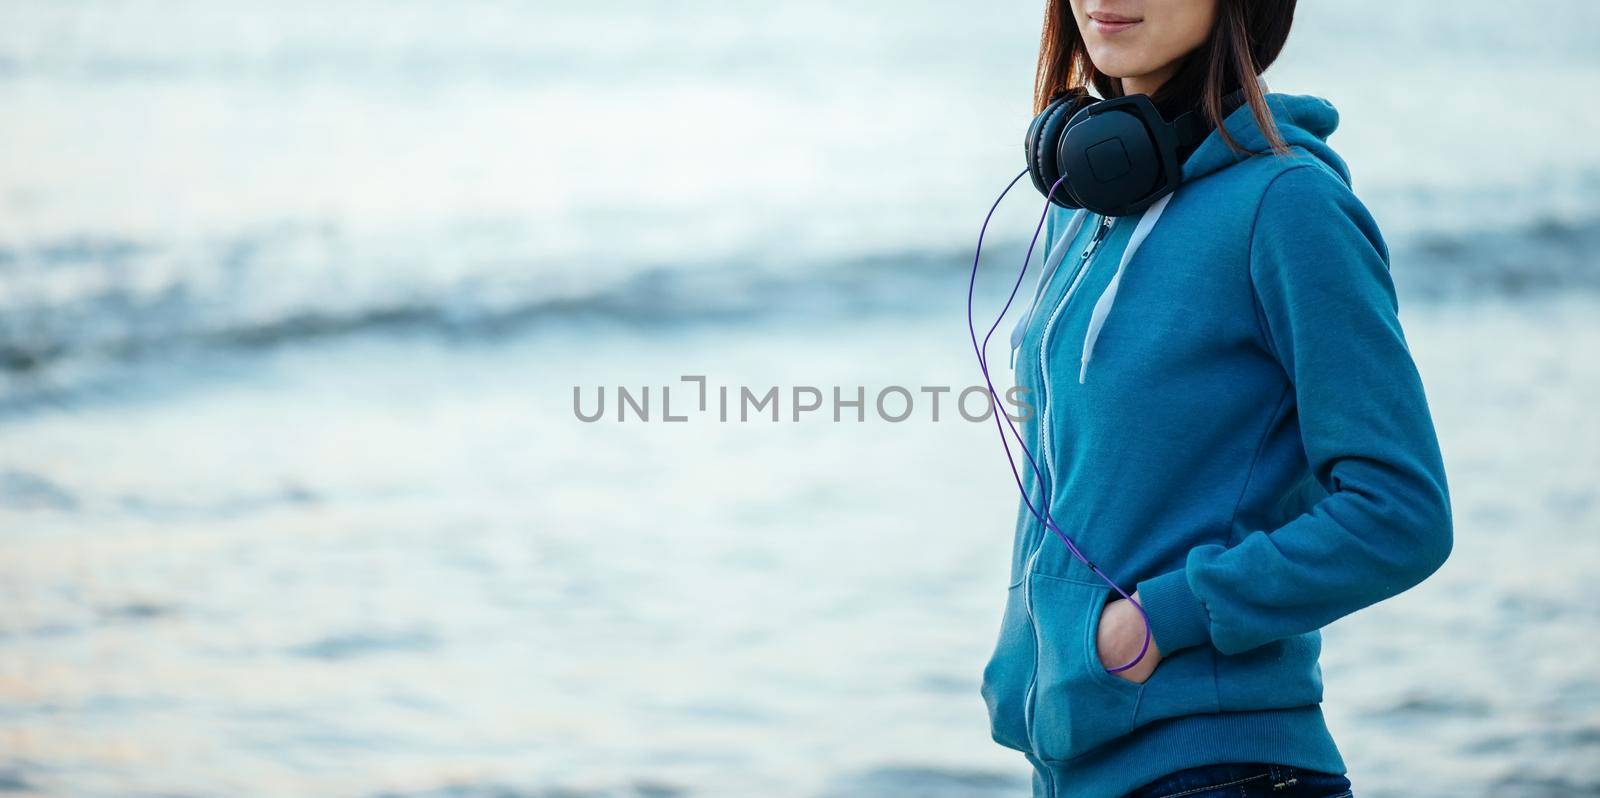 Girl with headphones on background of sea by alexAleksei